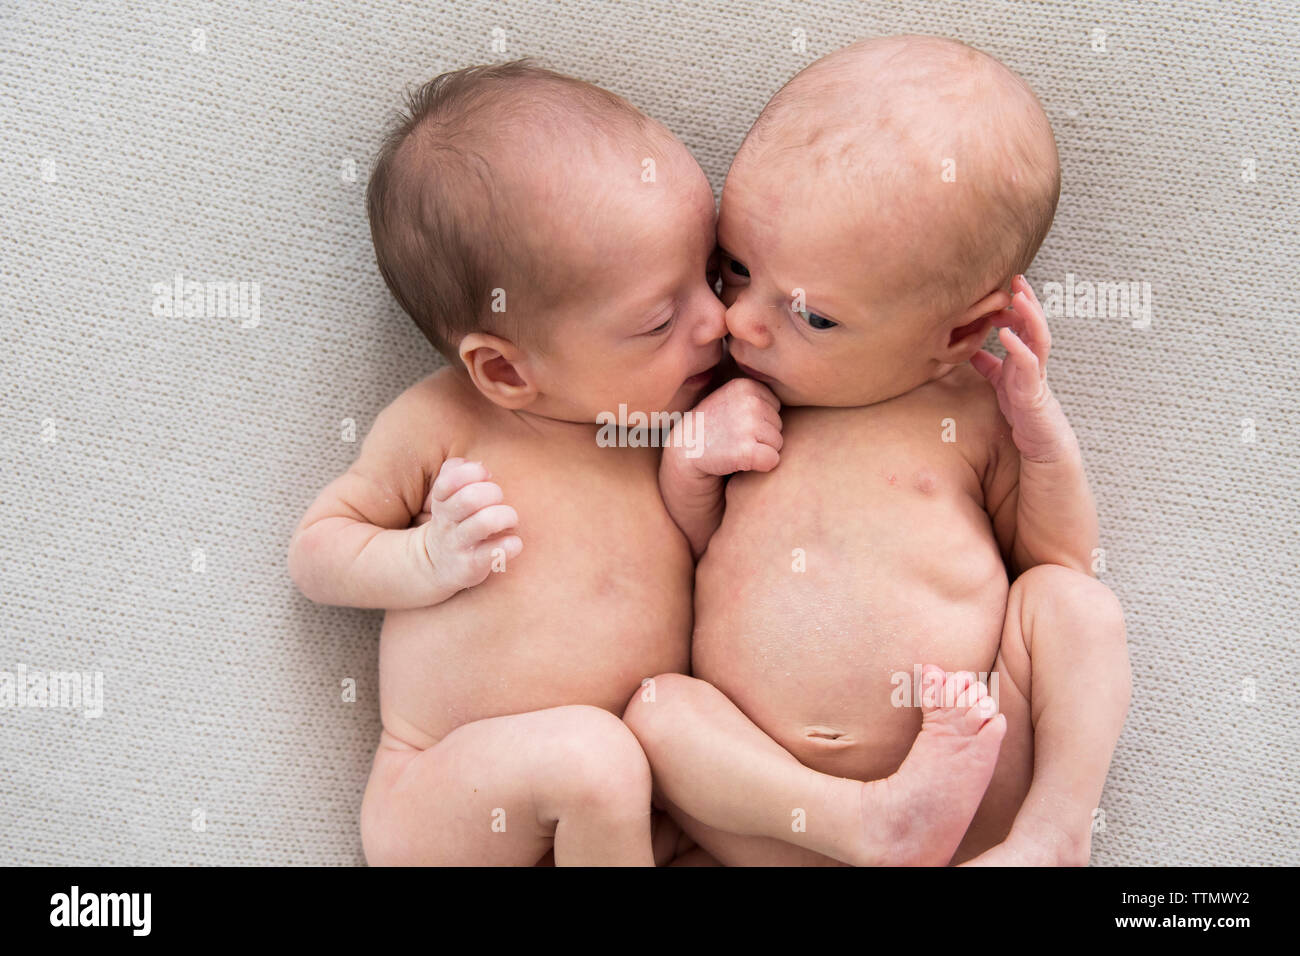 Newborn Twin Girls Laying Together on Off-White Blanket Stock Photo